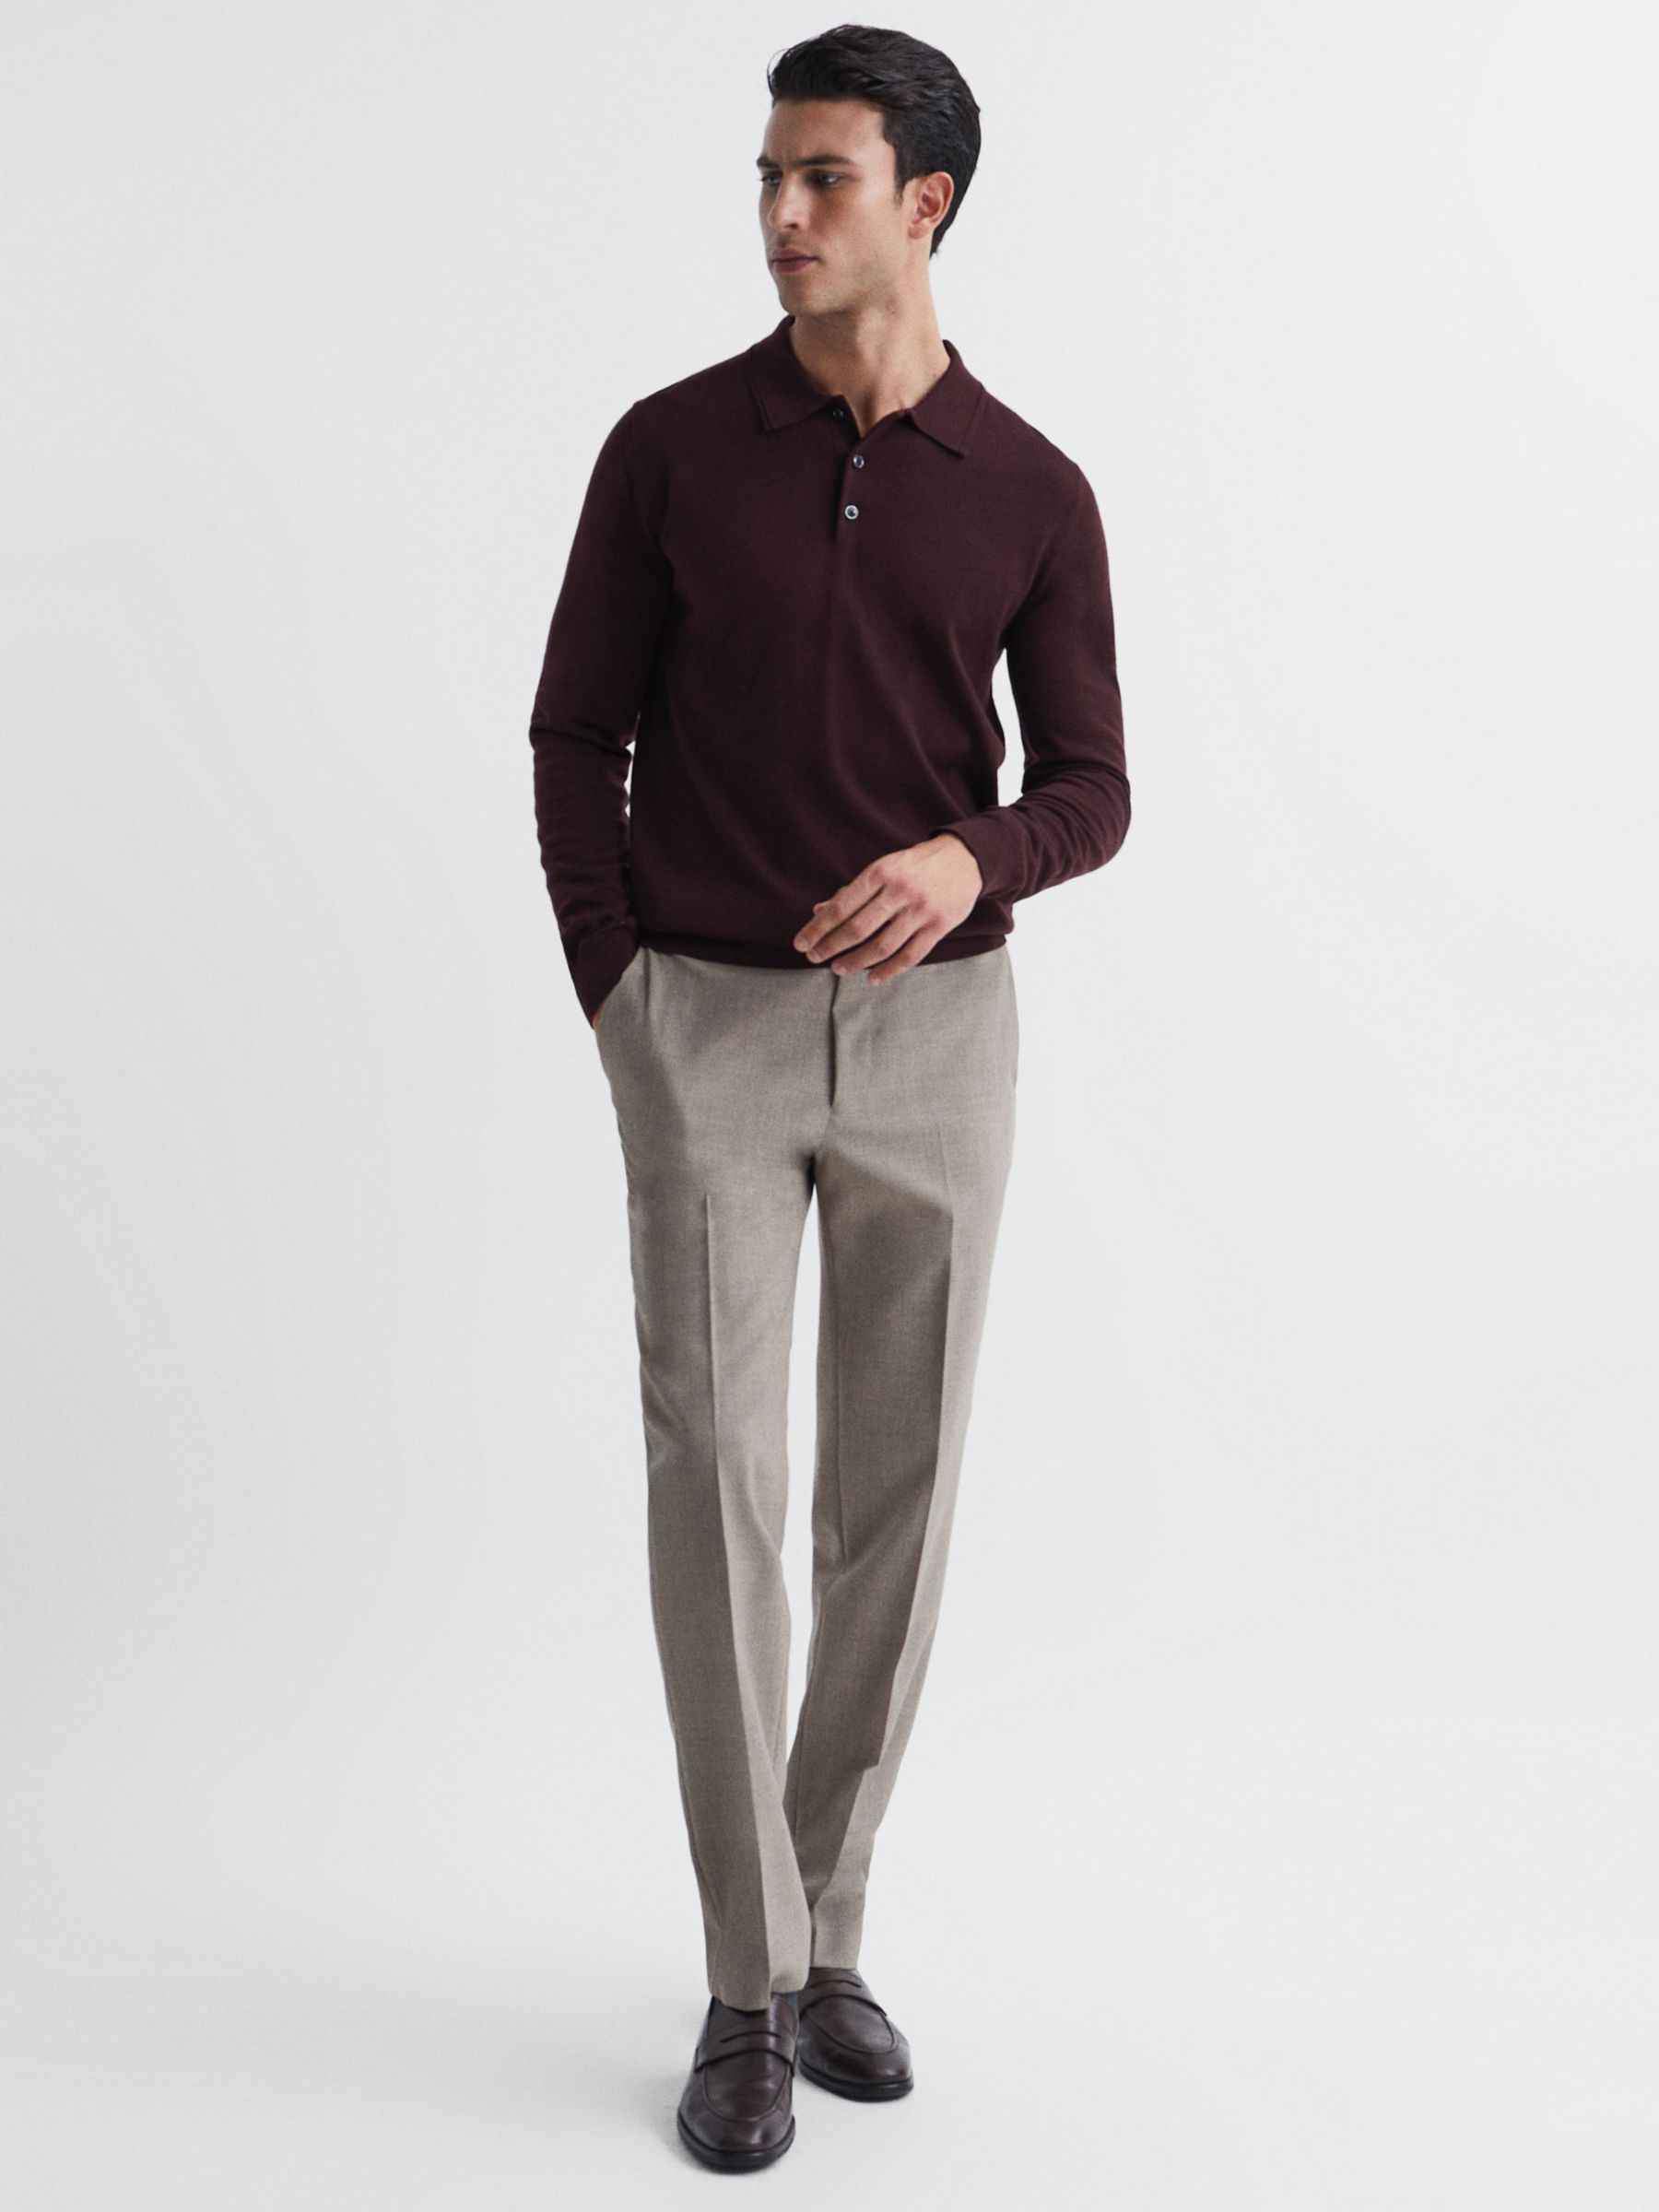 Reiss Trafford Knitted Wool Long Sleeve Polo Top, Bordeaux, XS